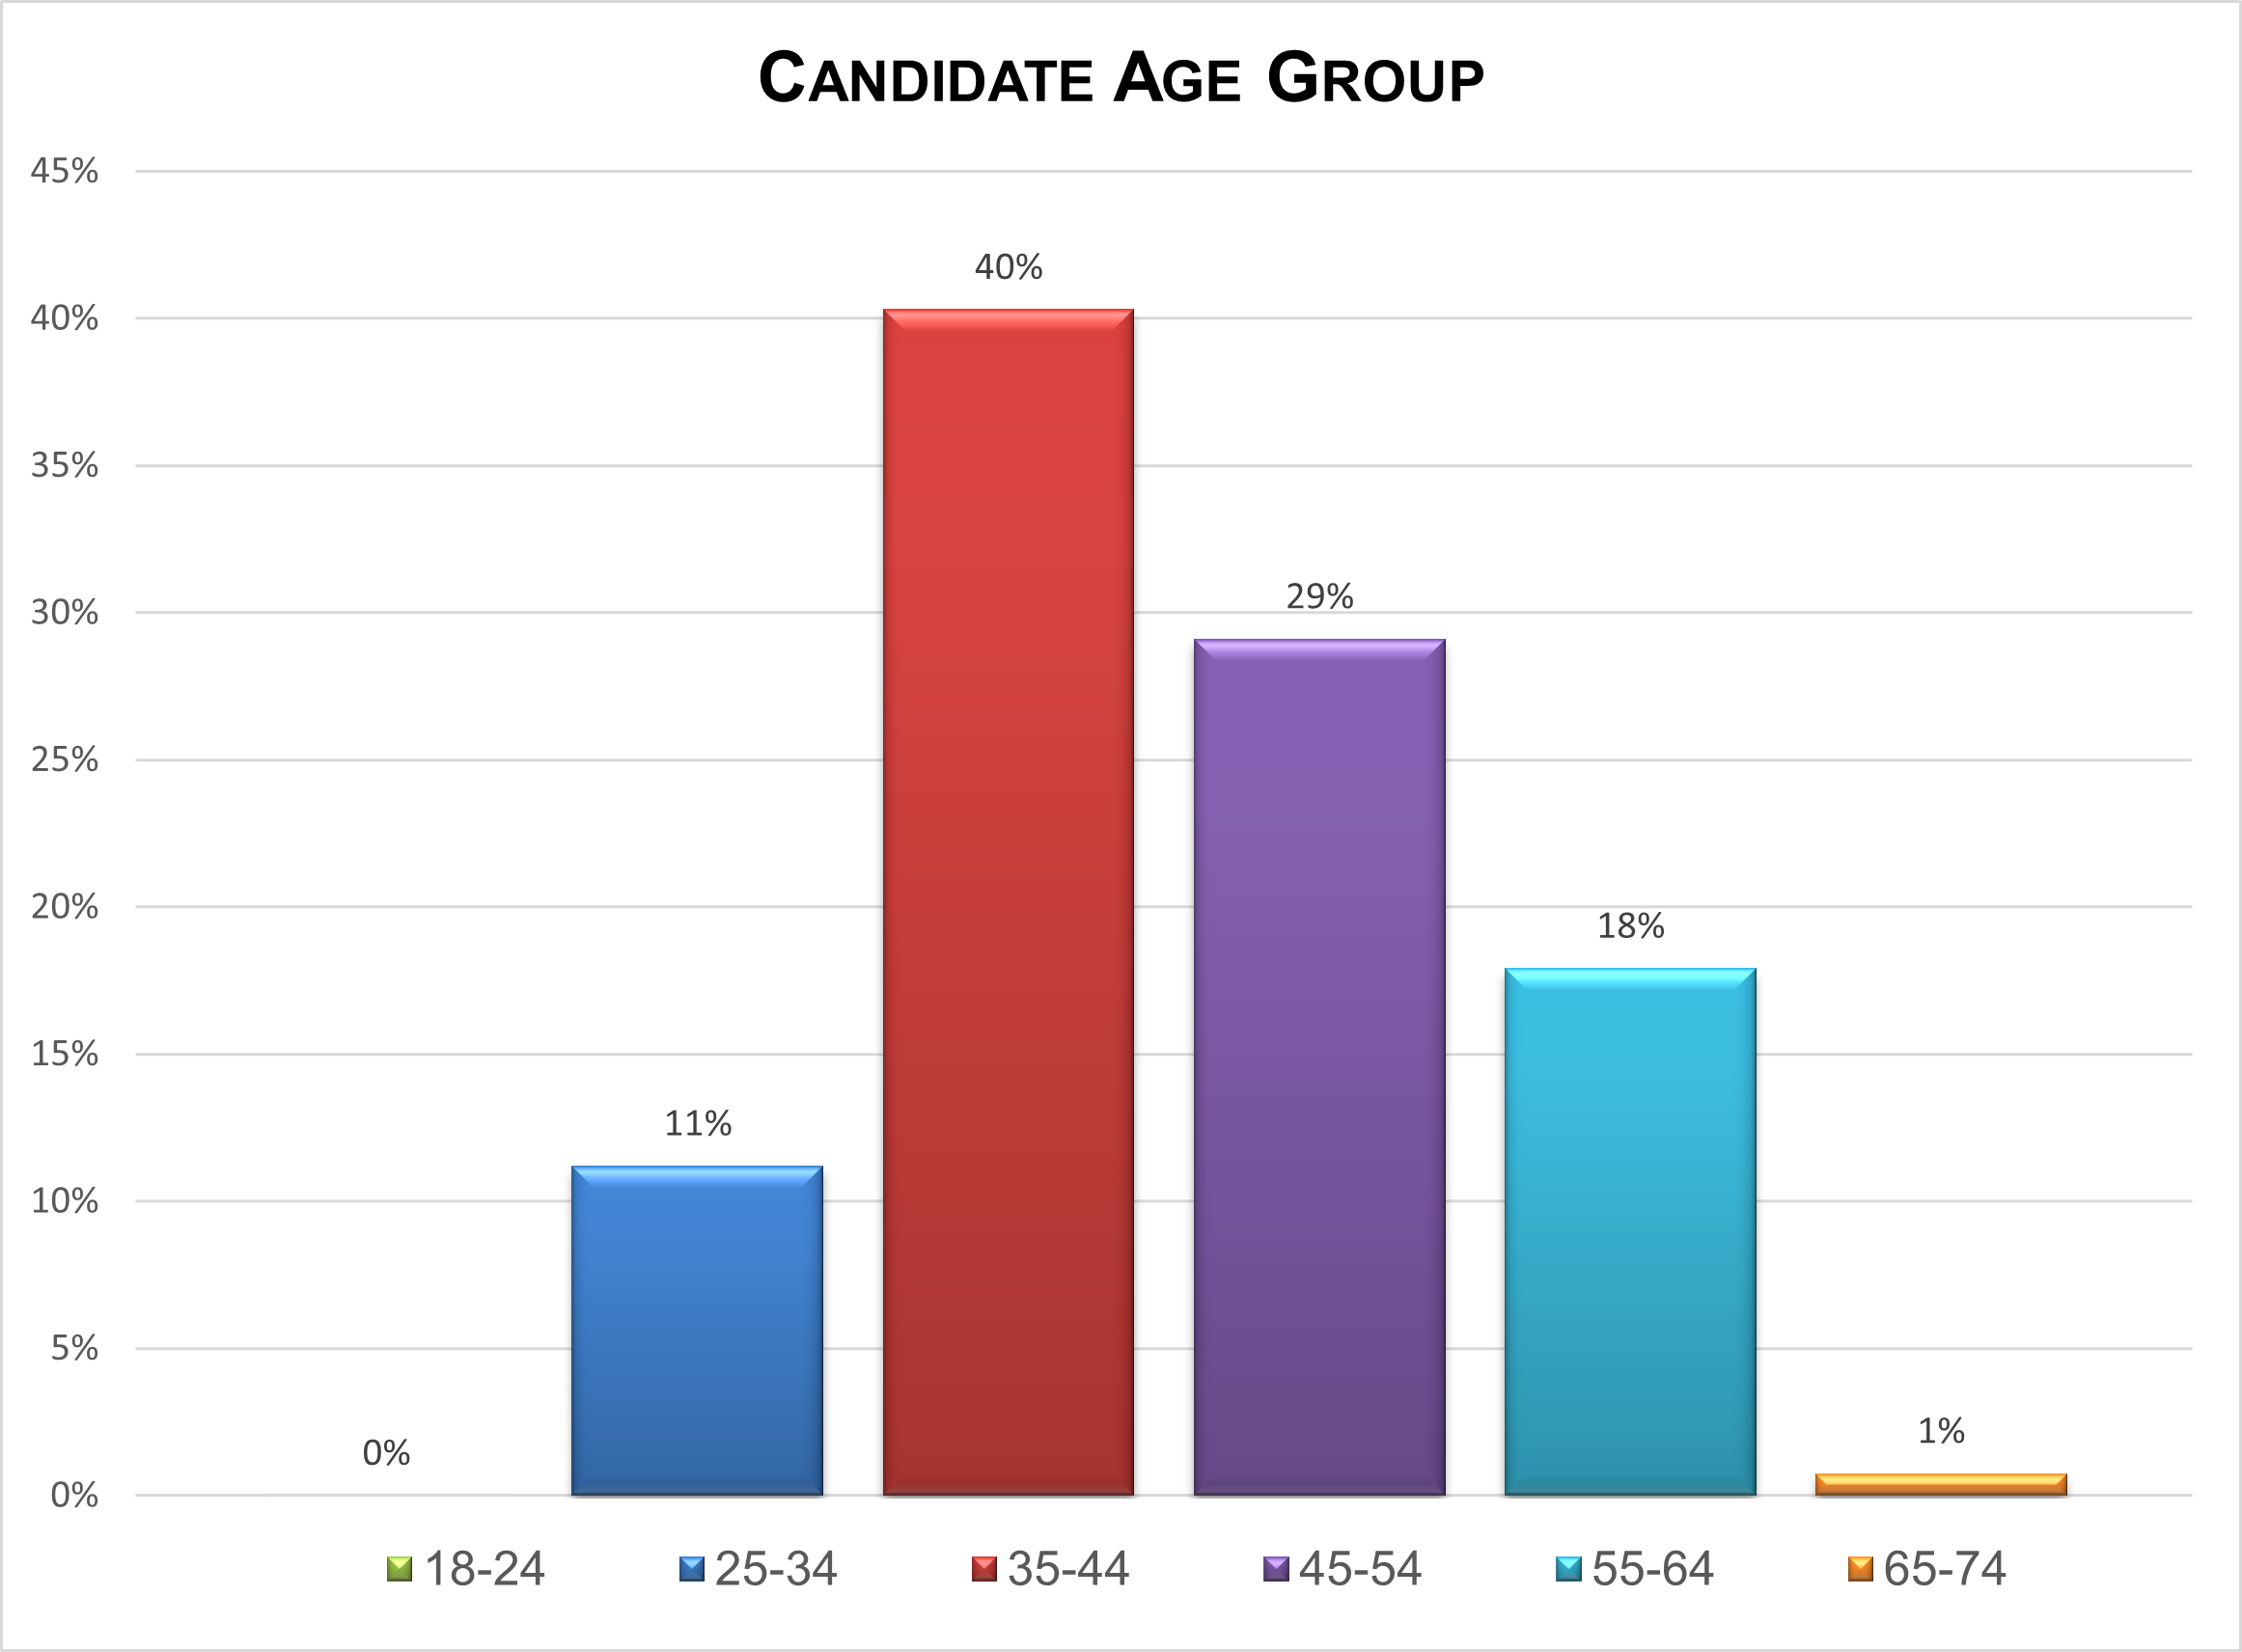 Candidate age group